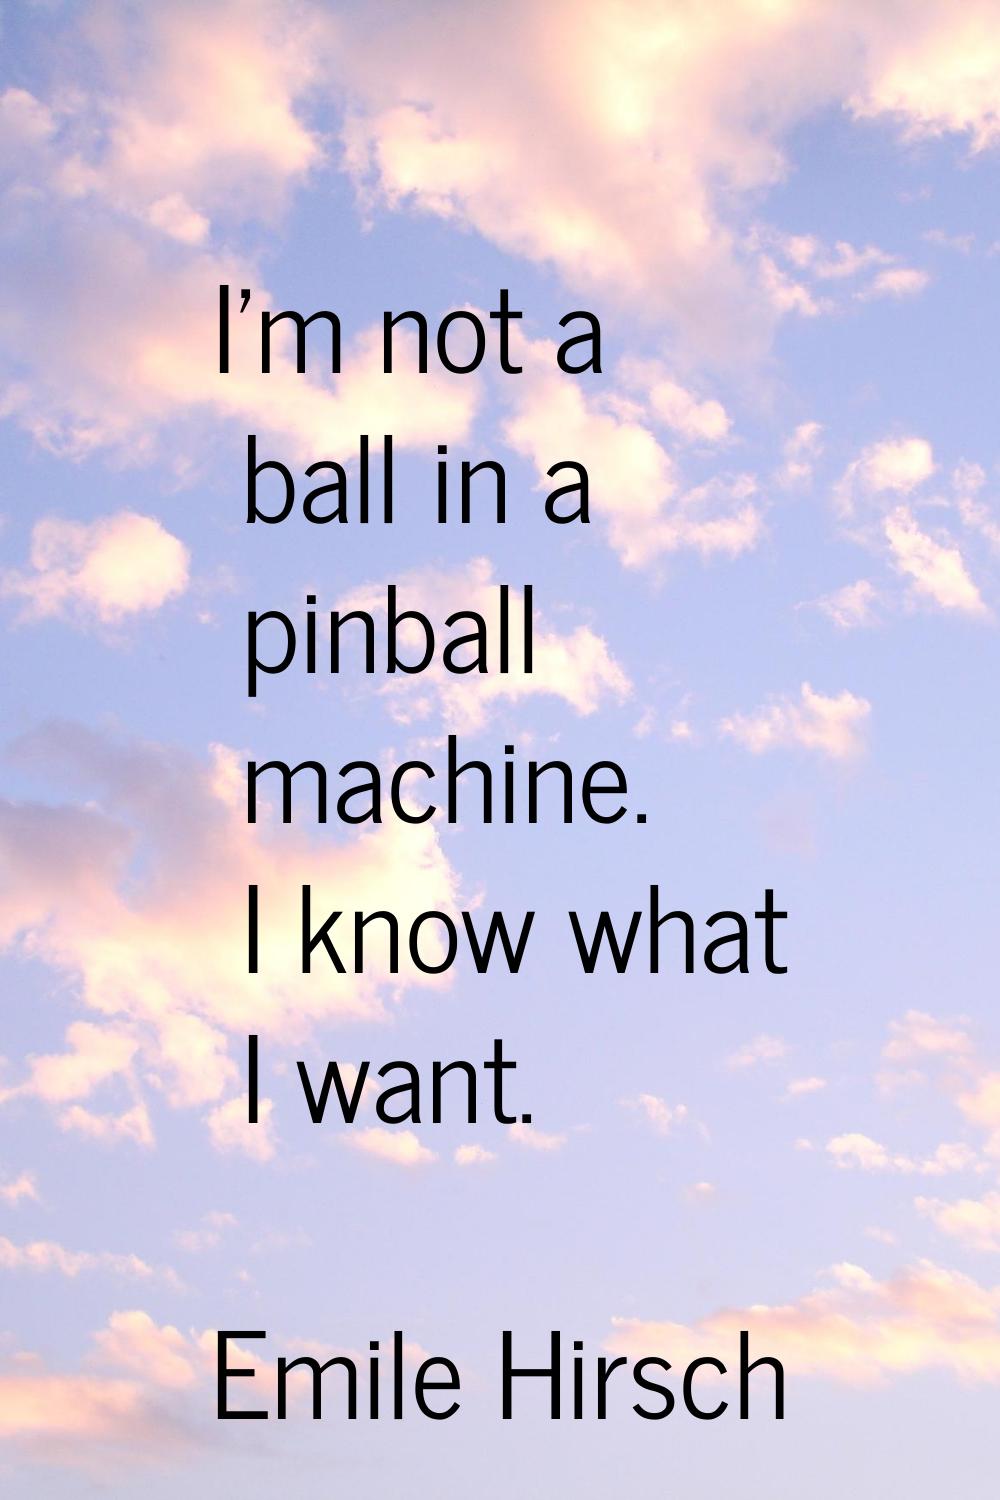 I'm not a ball in a pinball machine. I know what I want.